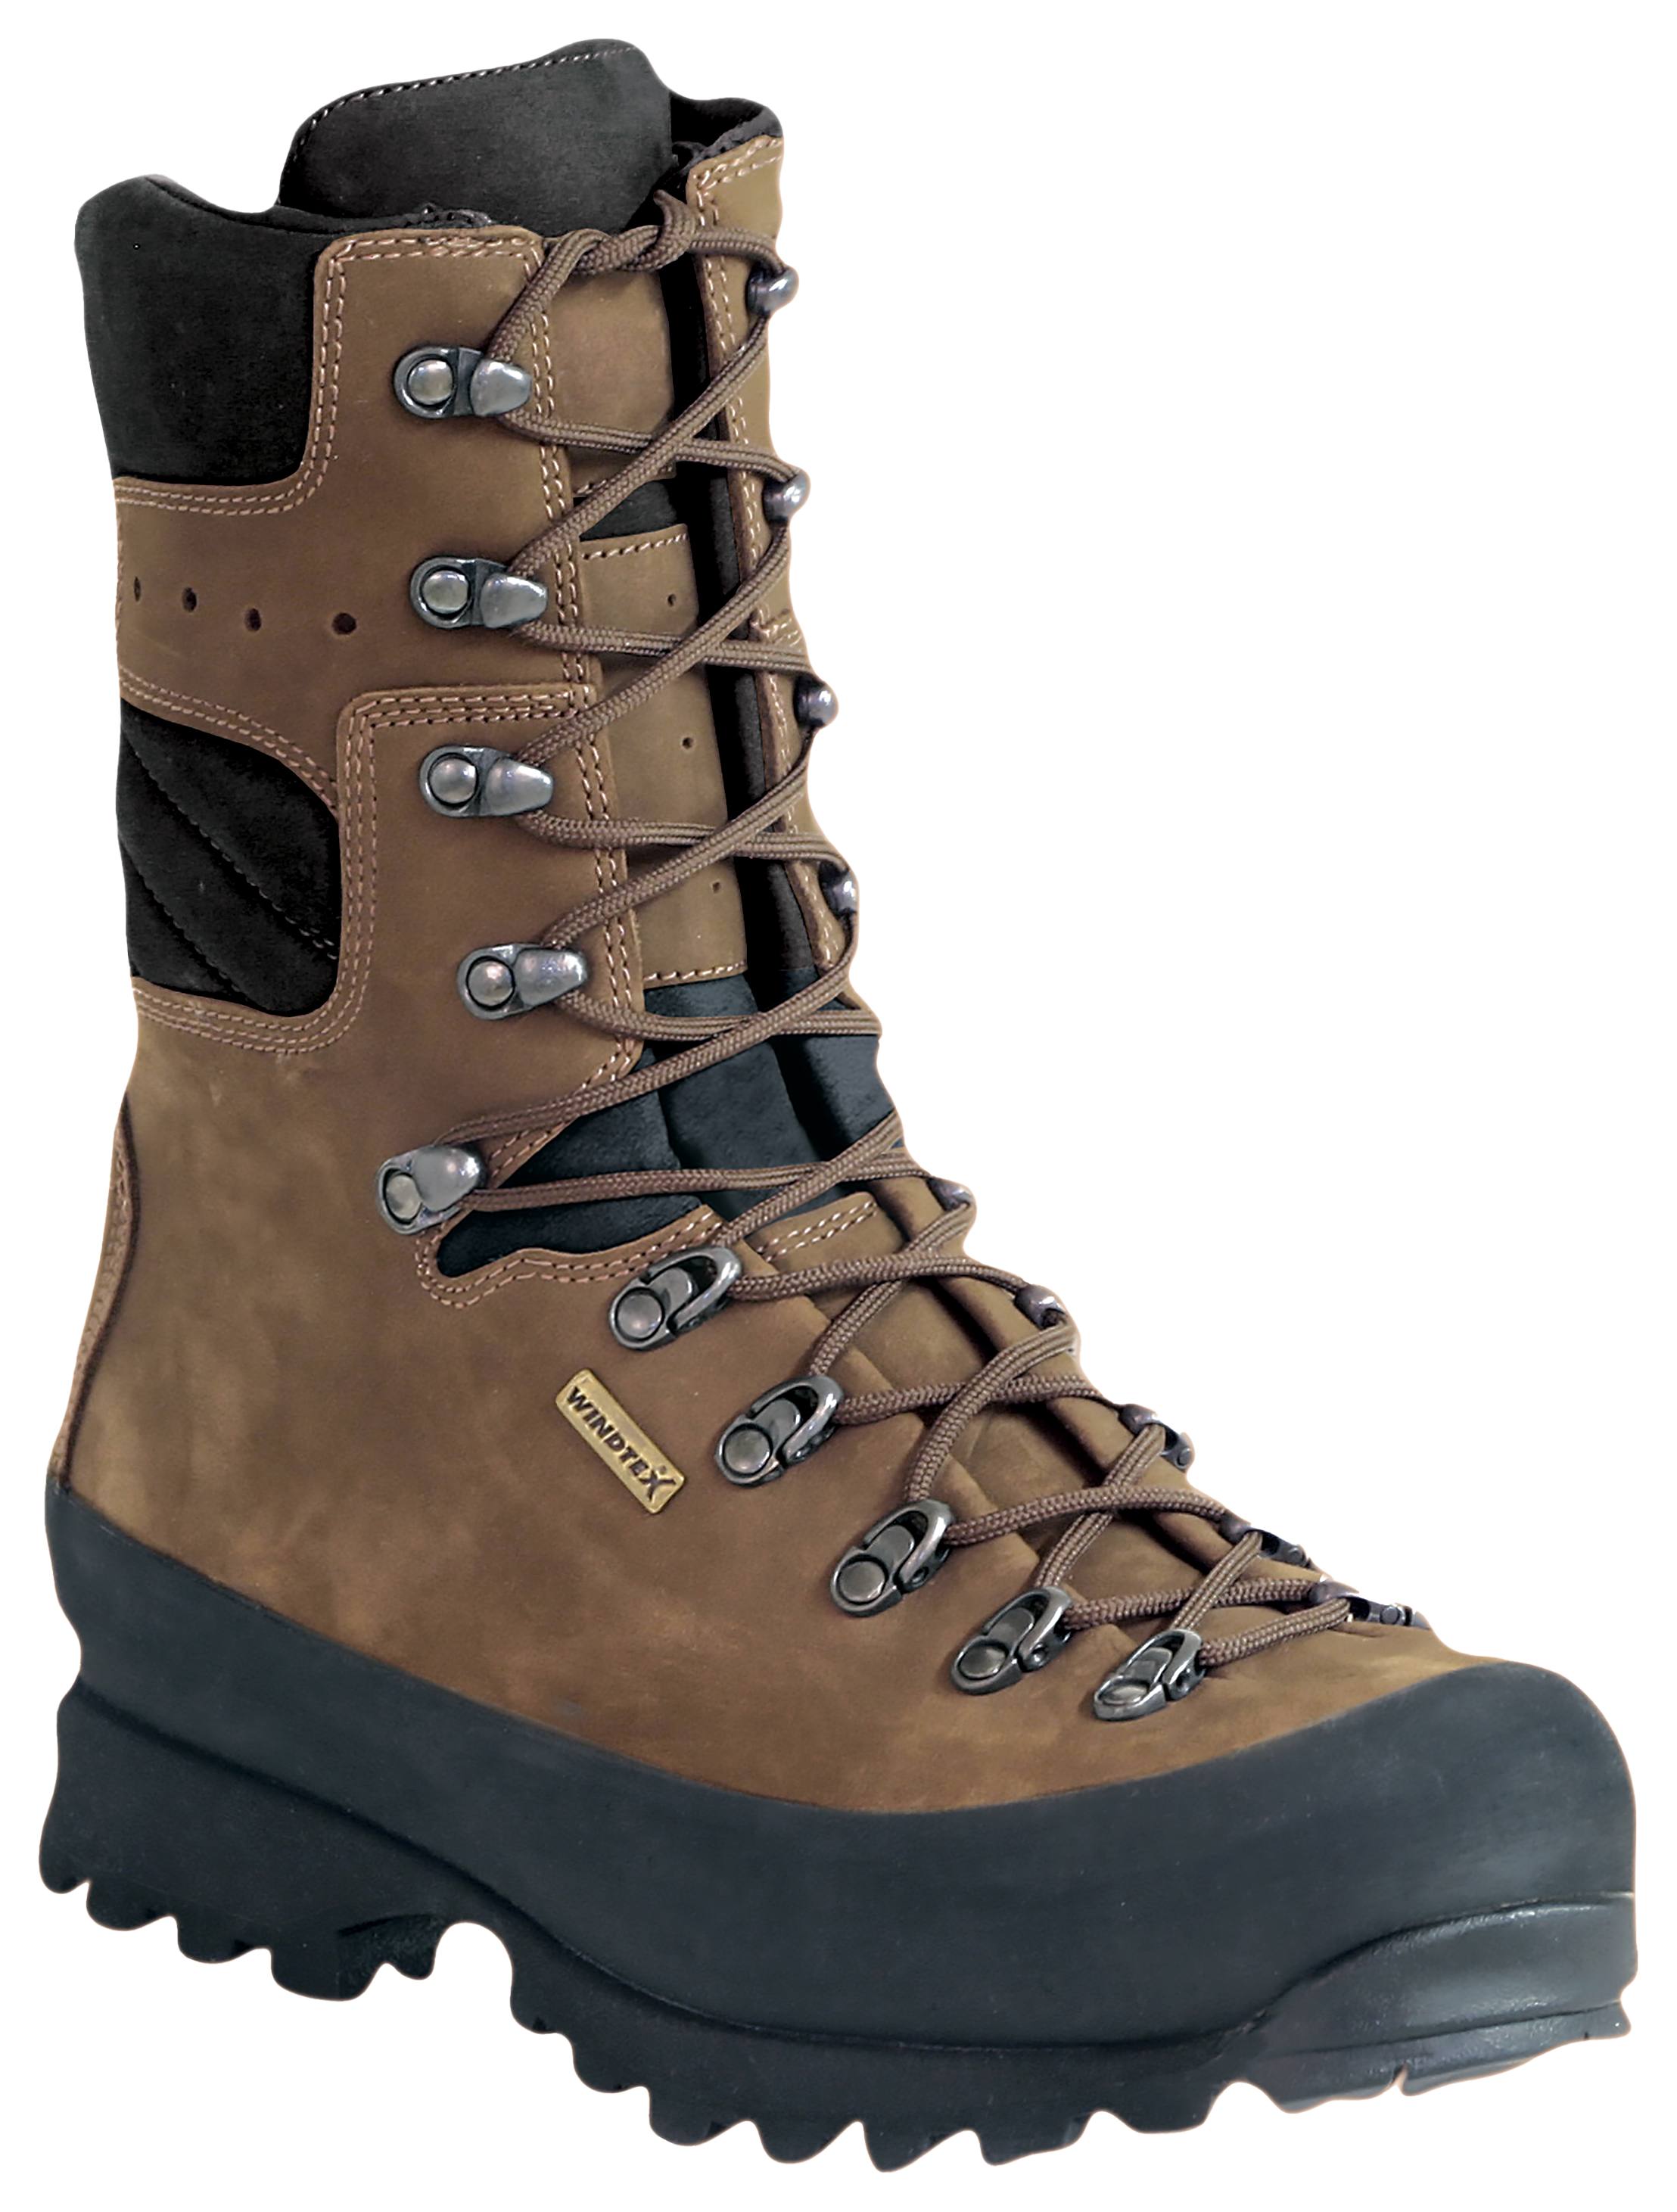 Kenetrek Mountain Extreme 1000 Insulated Waterproof Hunting Boots for Men - Brown - 10M